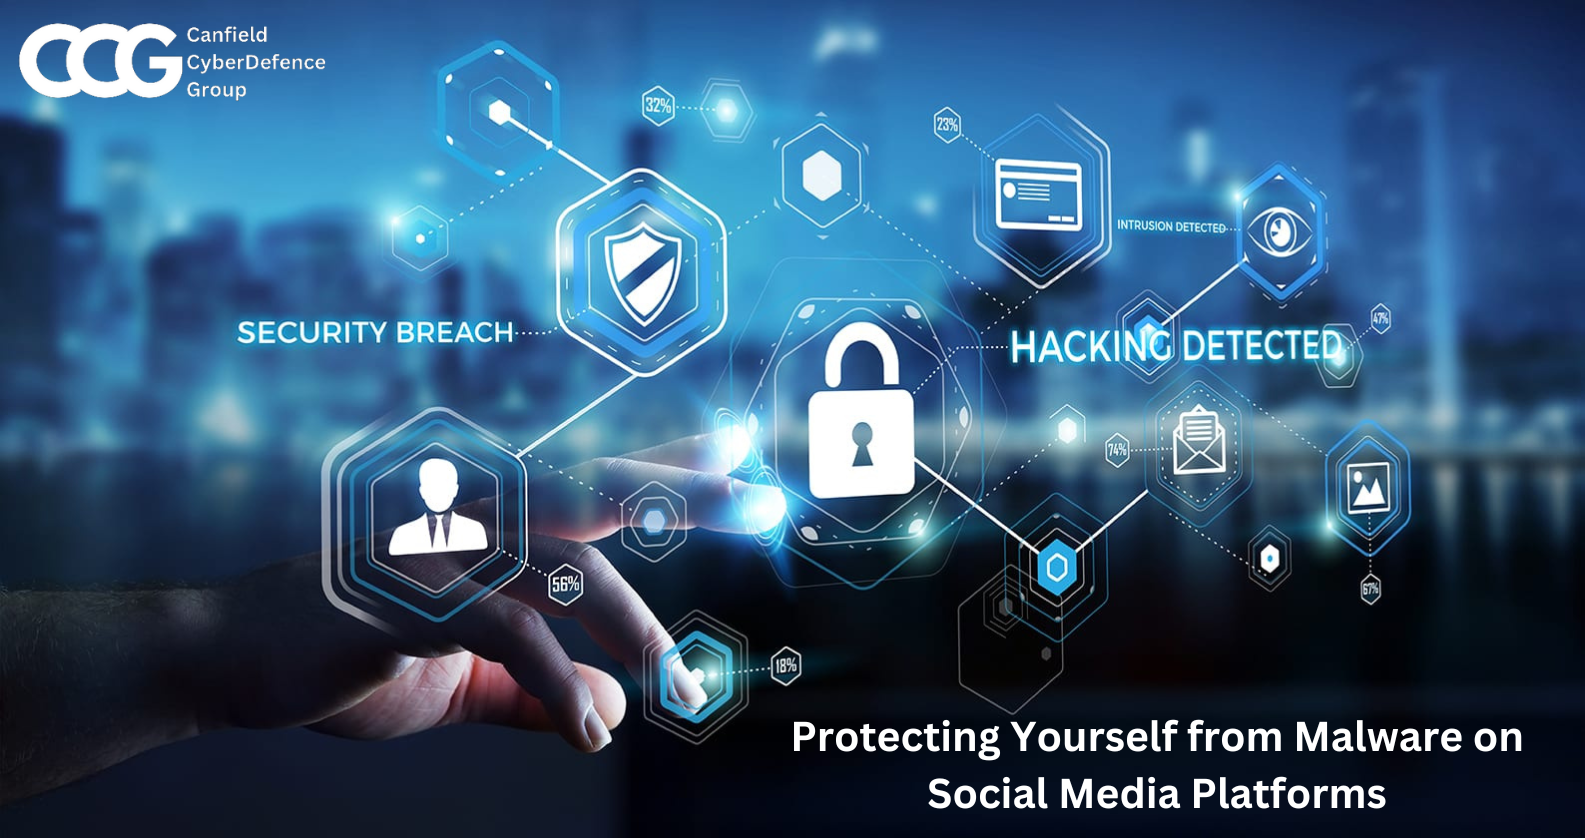 <strong>Protecting Yourself from Malware on Social Media Platforms</strong>